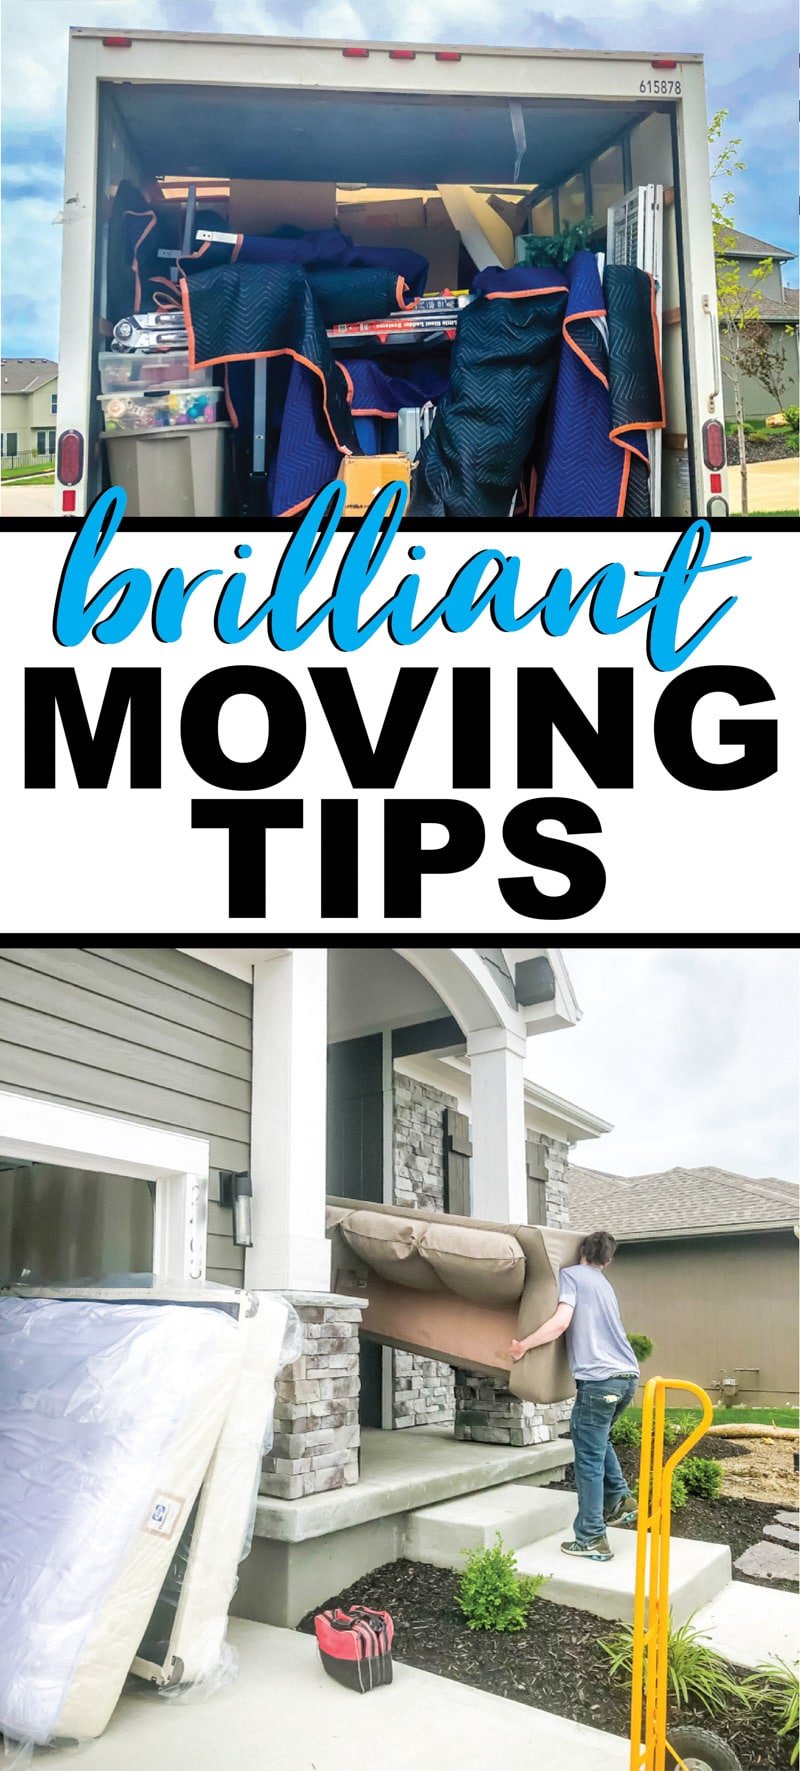 Brilliant packing and moving tips for moving long distance, out of state, or just around the corner! Great ideas and tricks that’ll work whether you’re downsizing to an apartment or moving into a house for the first time! And I love that checklist idea for keeping organized last minute!